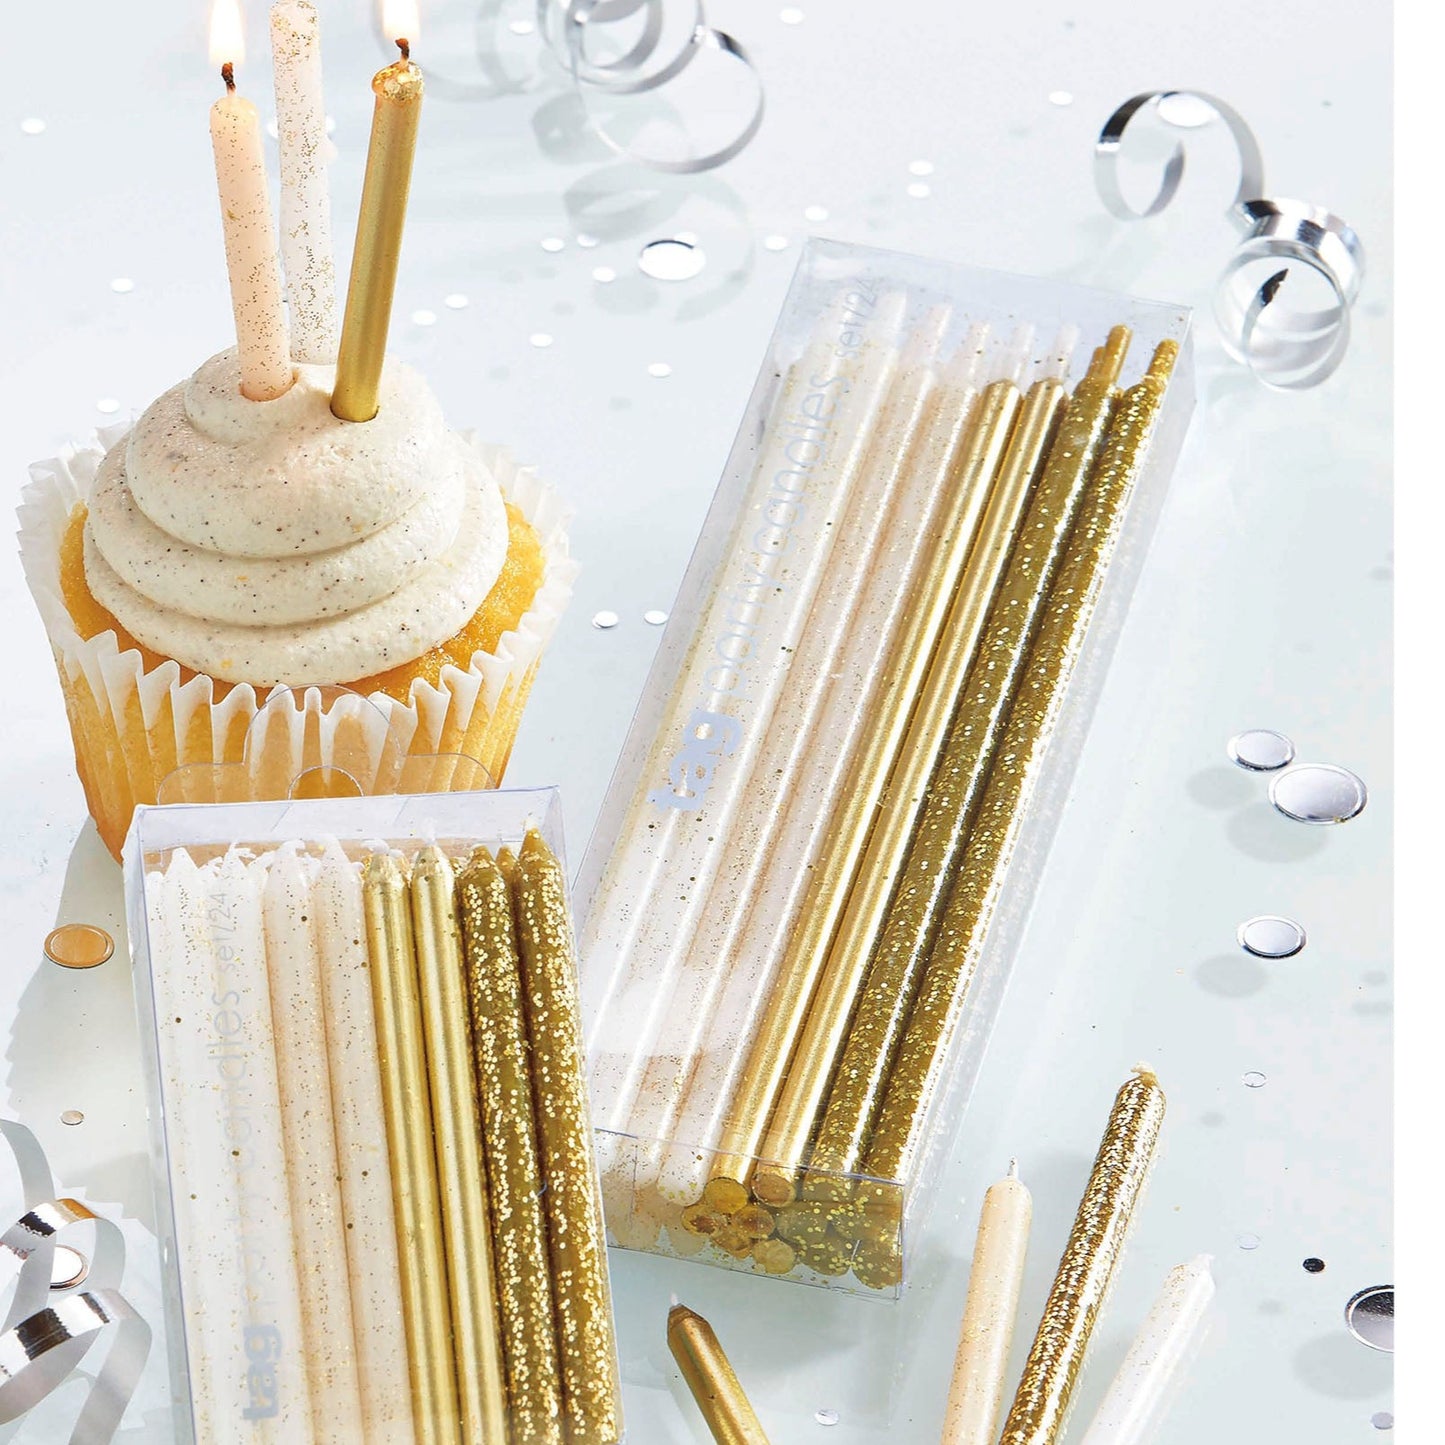 packages of gold and white glittered candles, cupcake with candles in it, and confetti and tabletop.